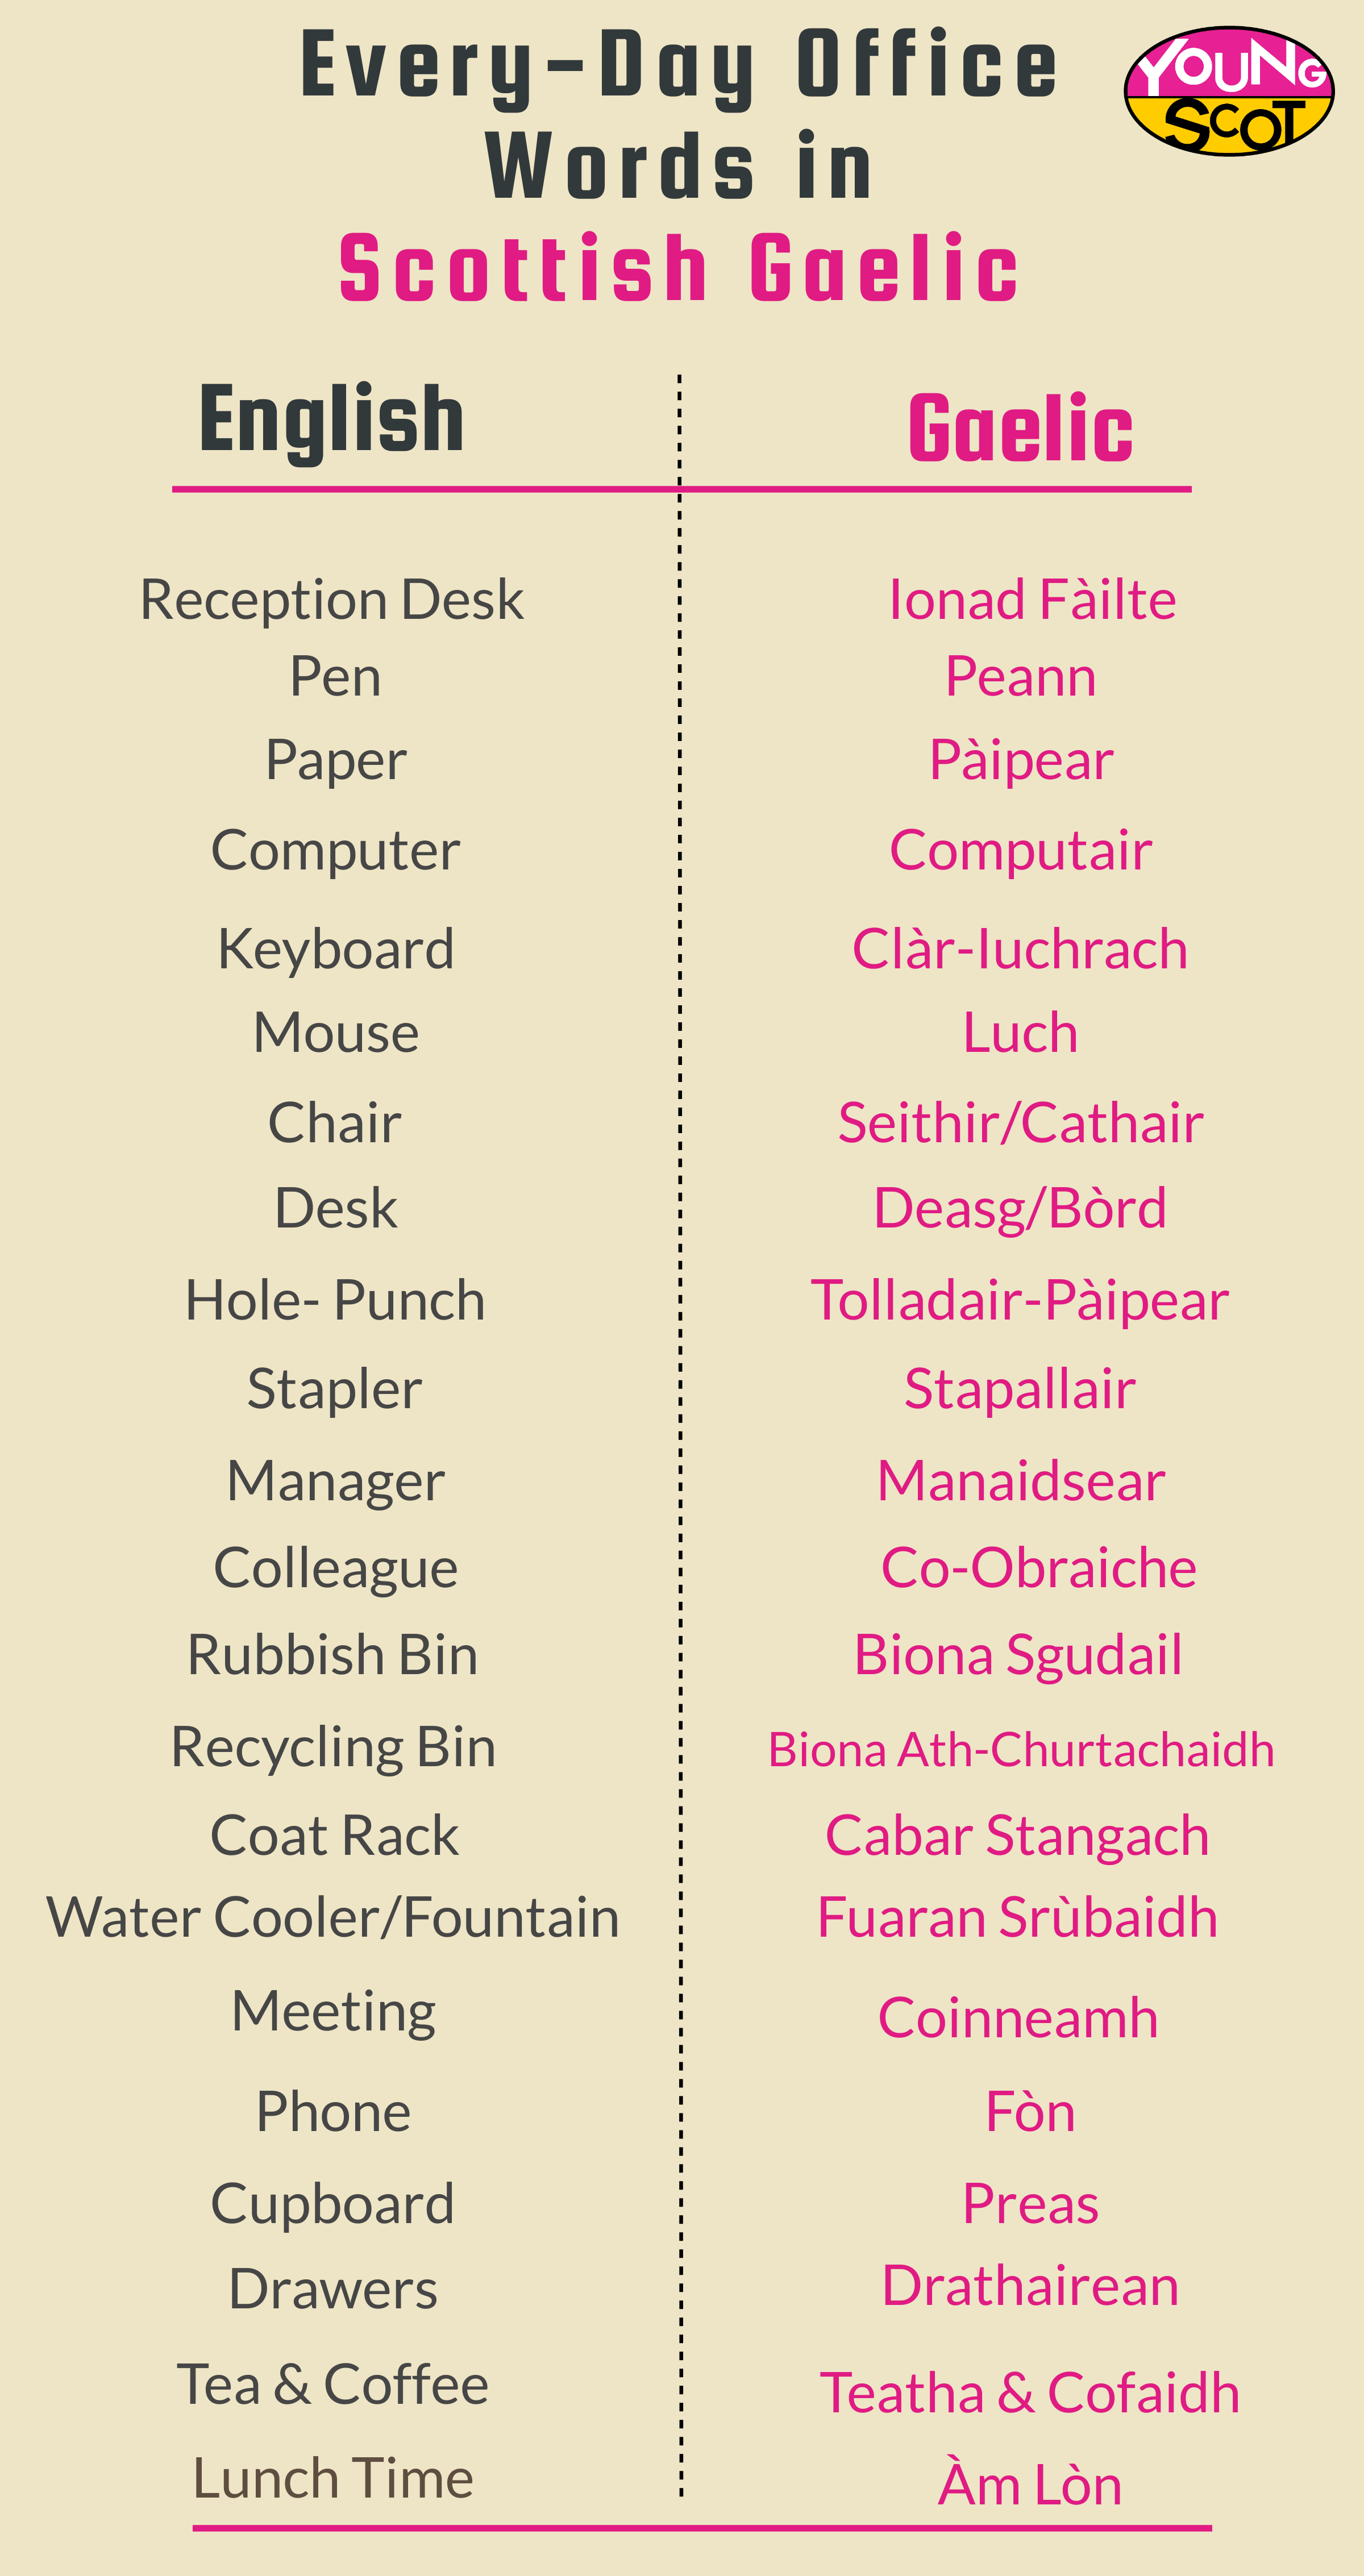 Infographic with common office words and their Gaelic translations.